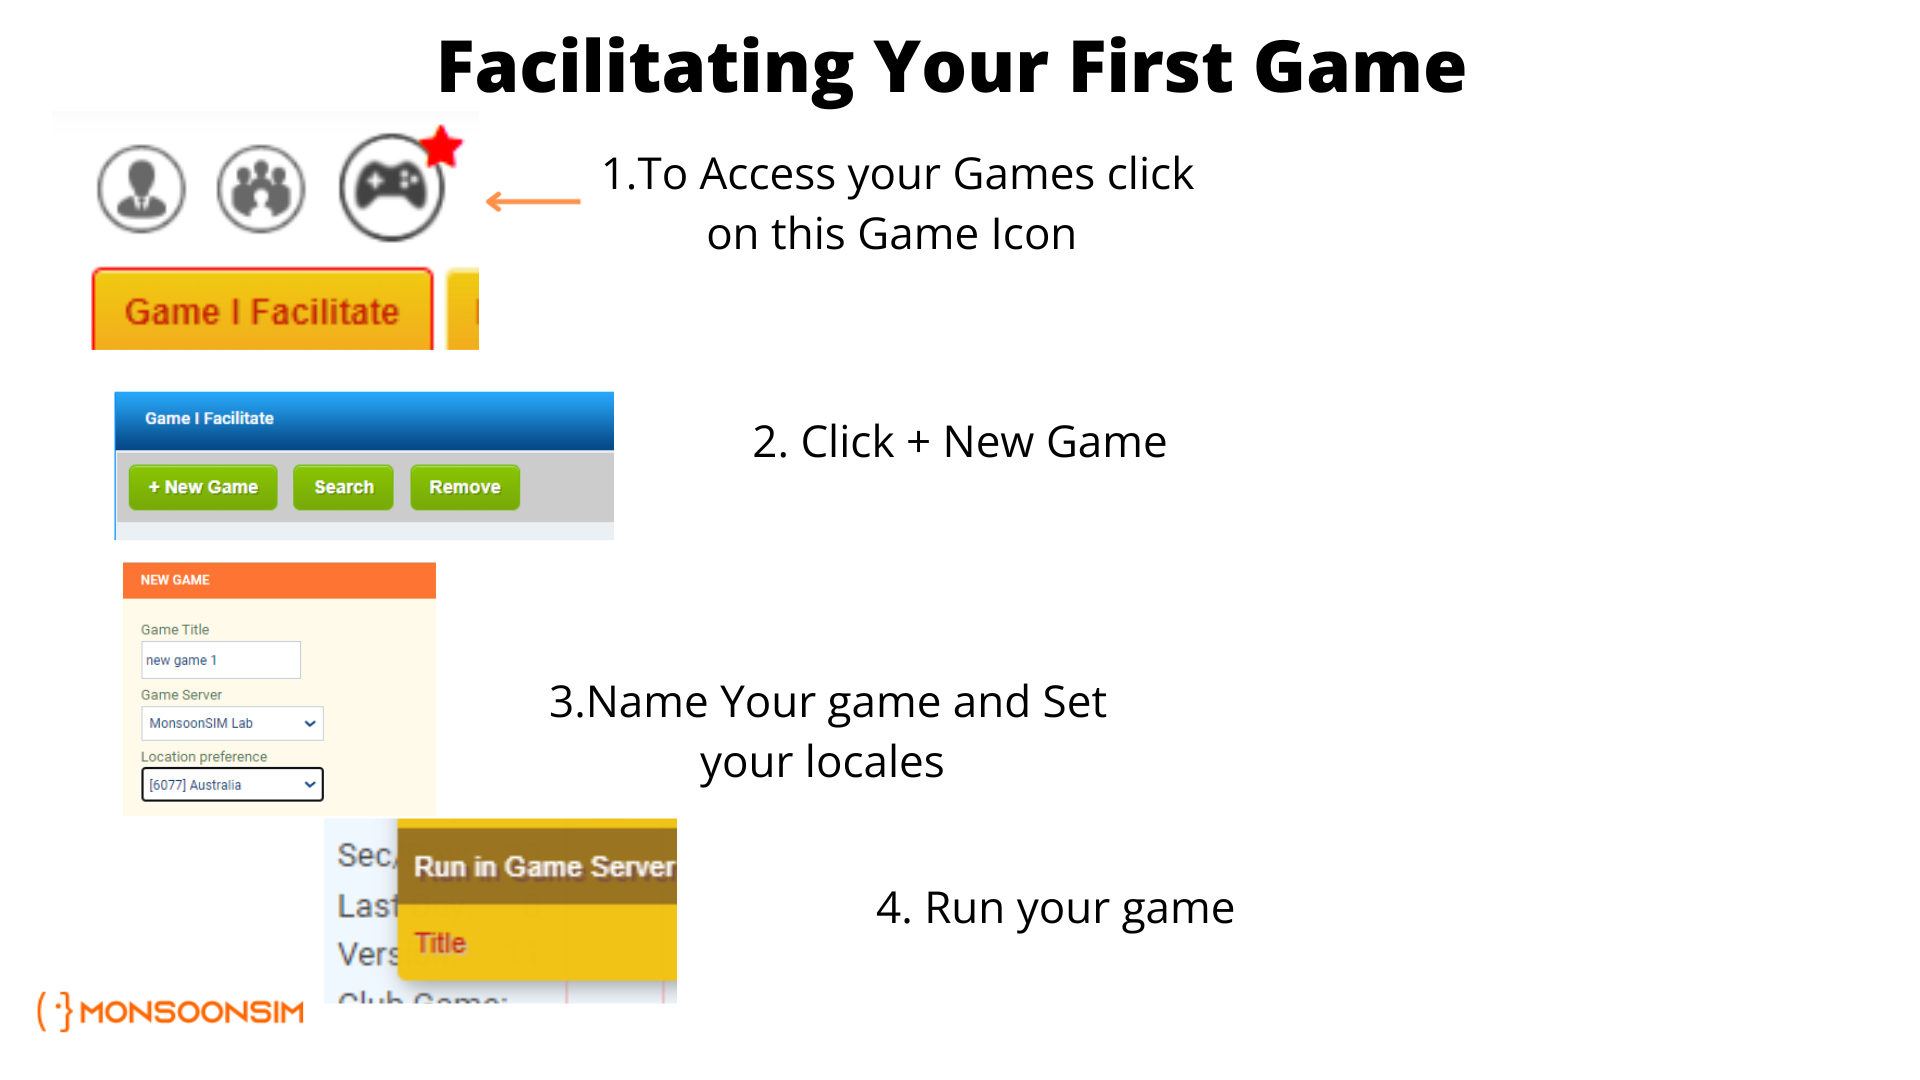 Step-by-step interface guide for facilitators on MonsoonSIM, showing the 'Game I Facilitate' section, with annotations for accessing games, adding a new game, naming your game, setting locales, and the option to run your game